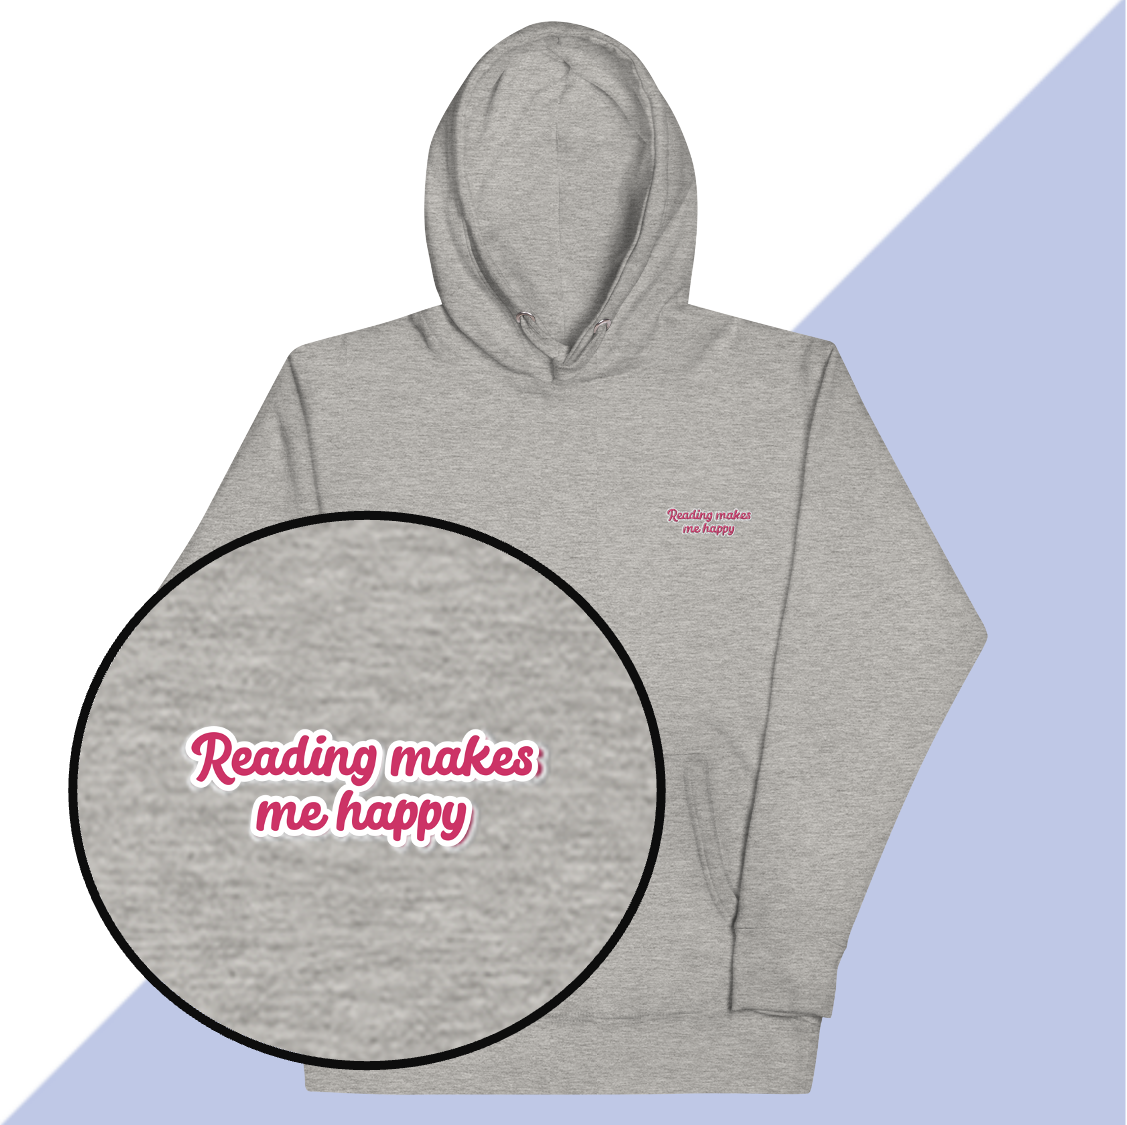 READING MAKES ME HAPPY - Embroidered Unisex Hoodie